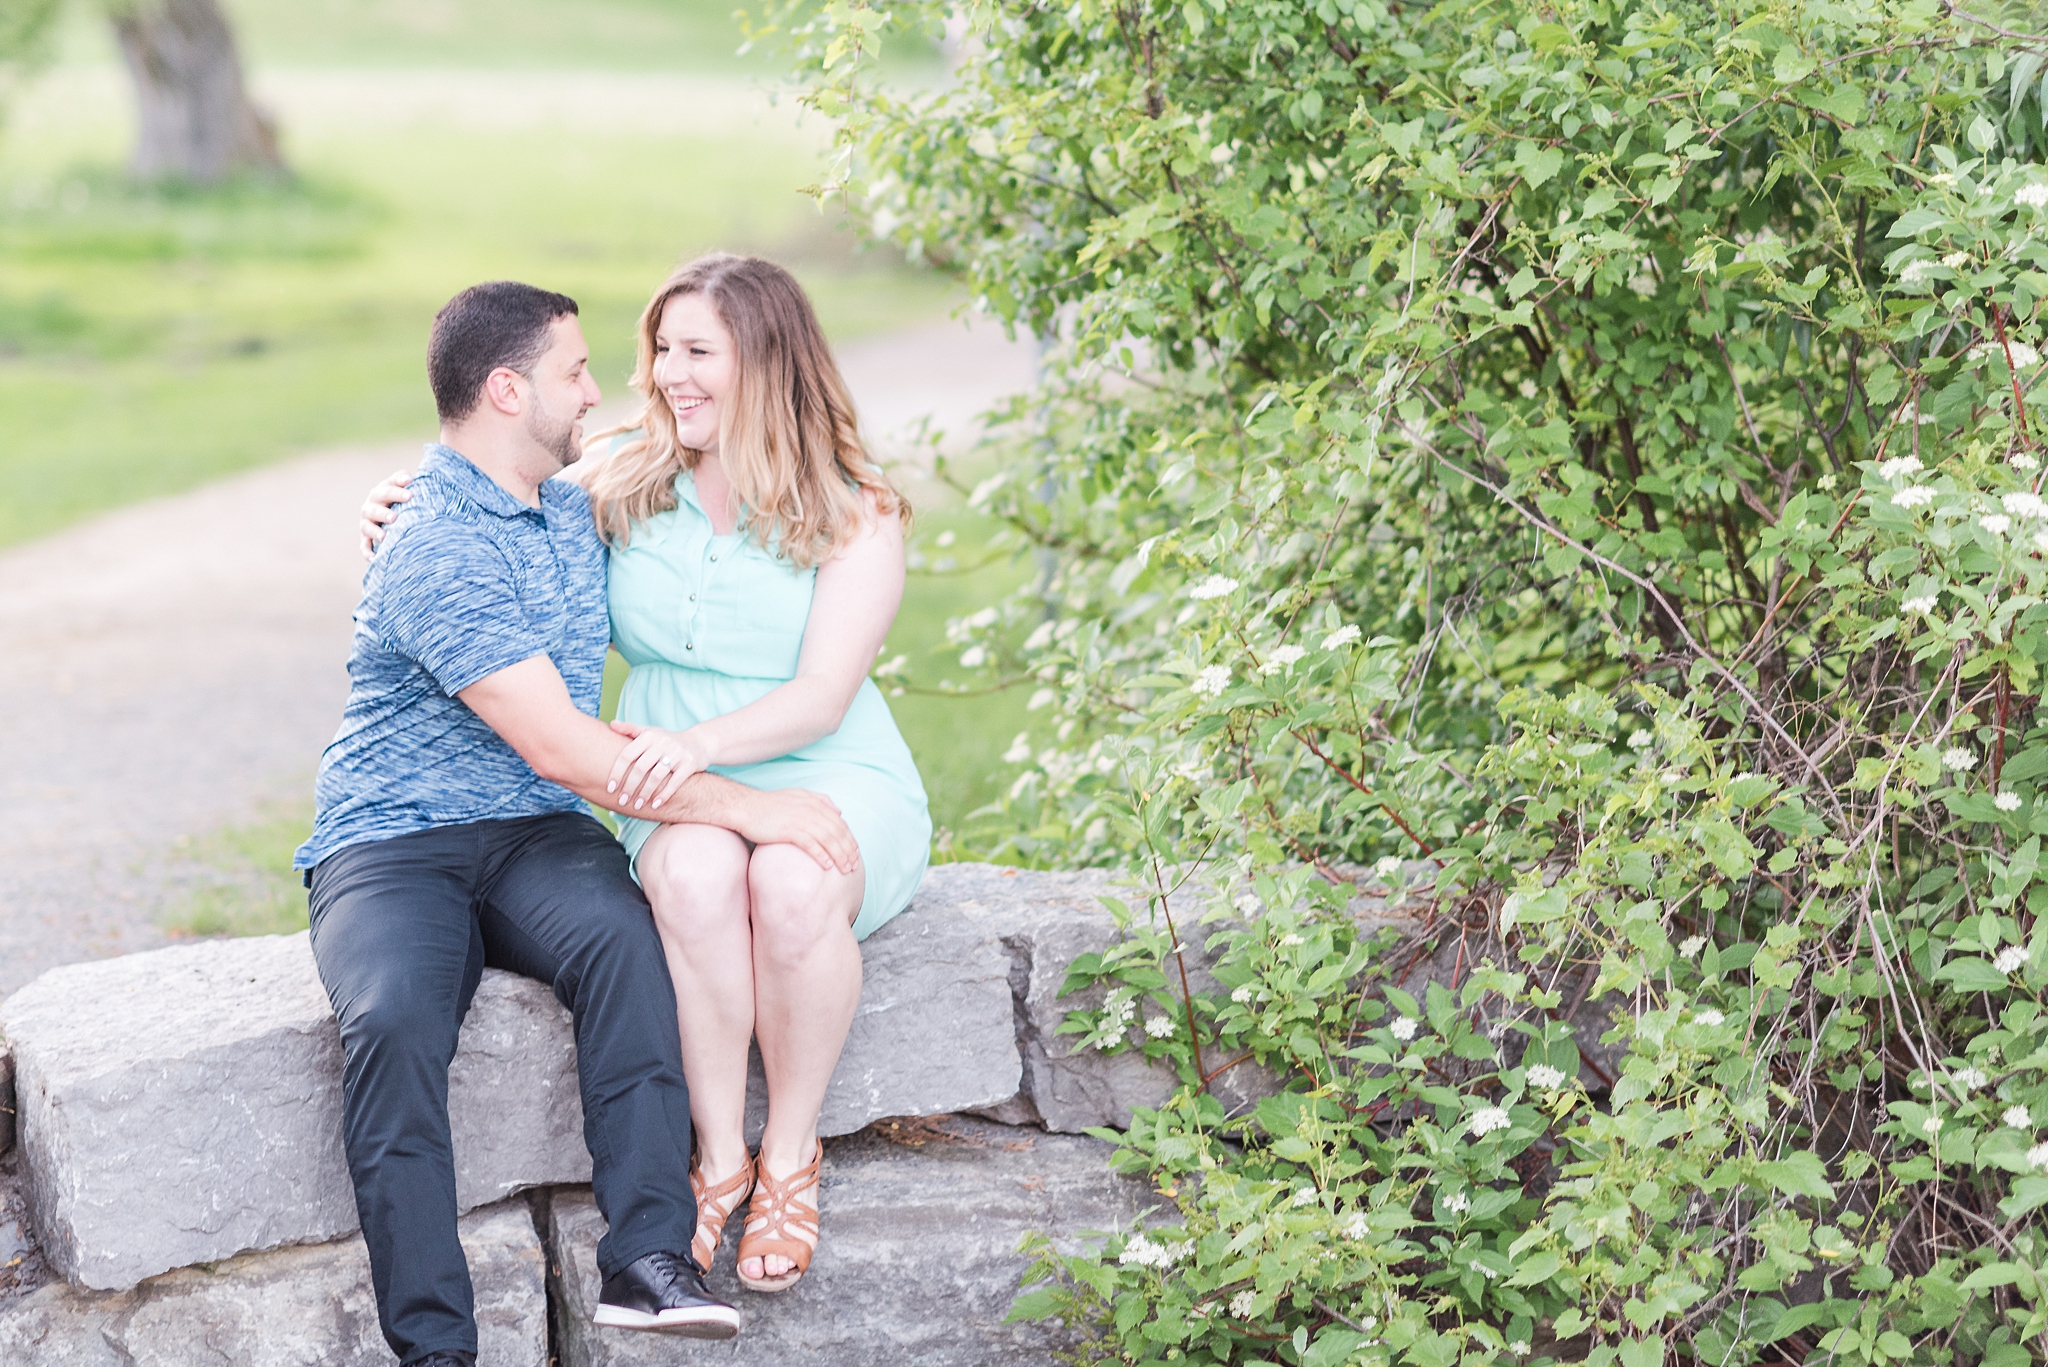 Spring experimental farm engagement | ottawa engagement | engagement photos at dominion arboretum at the central experimental farm get more inspiration from this fun springtime engagement session. #ottawawedding #weddingphotography #ottawaweddings